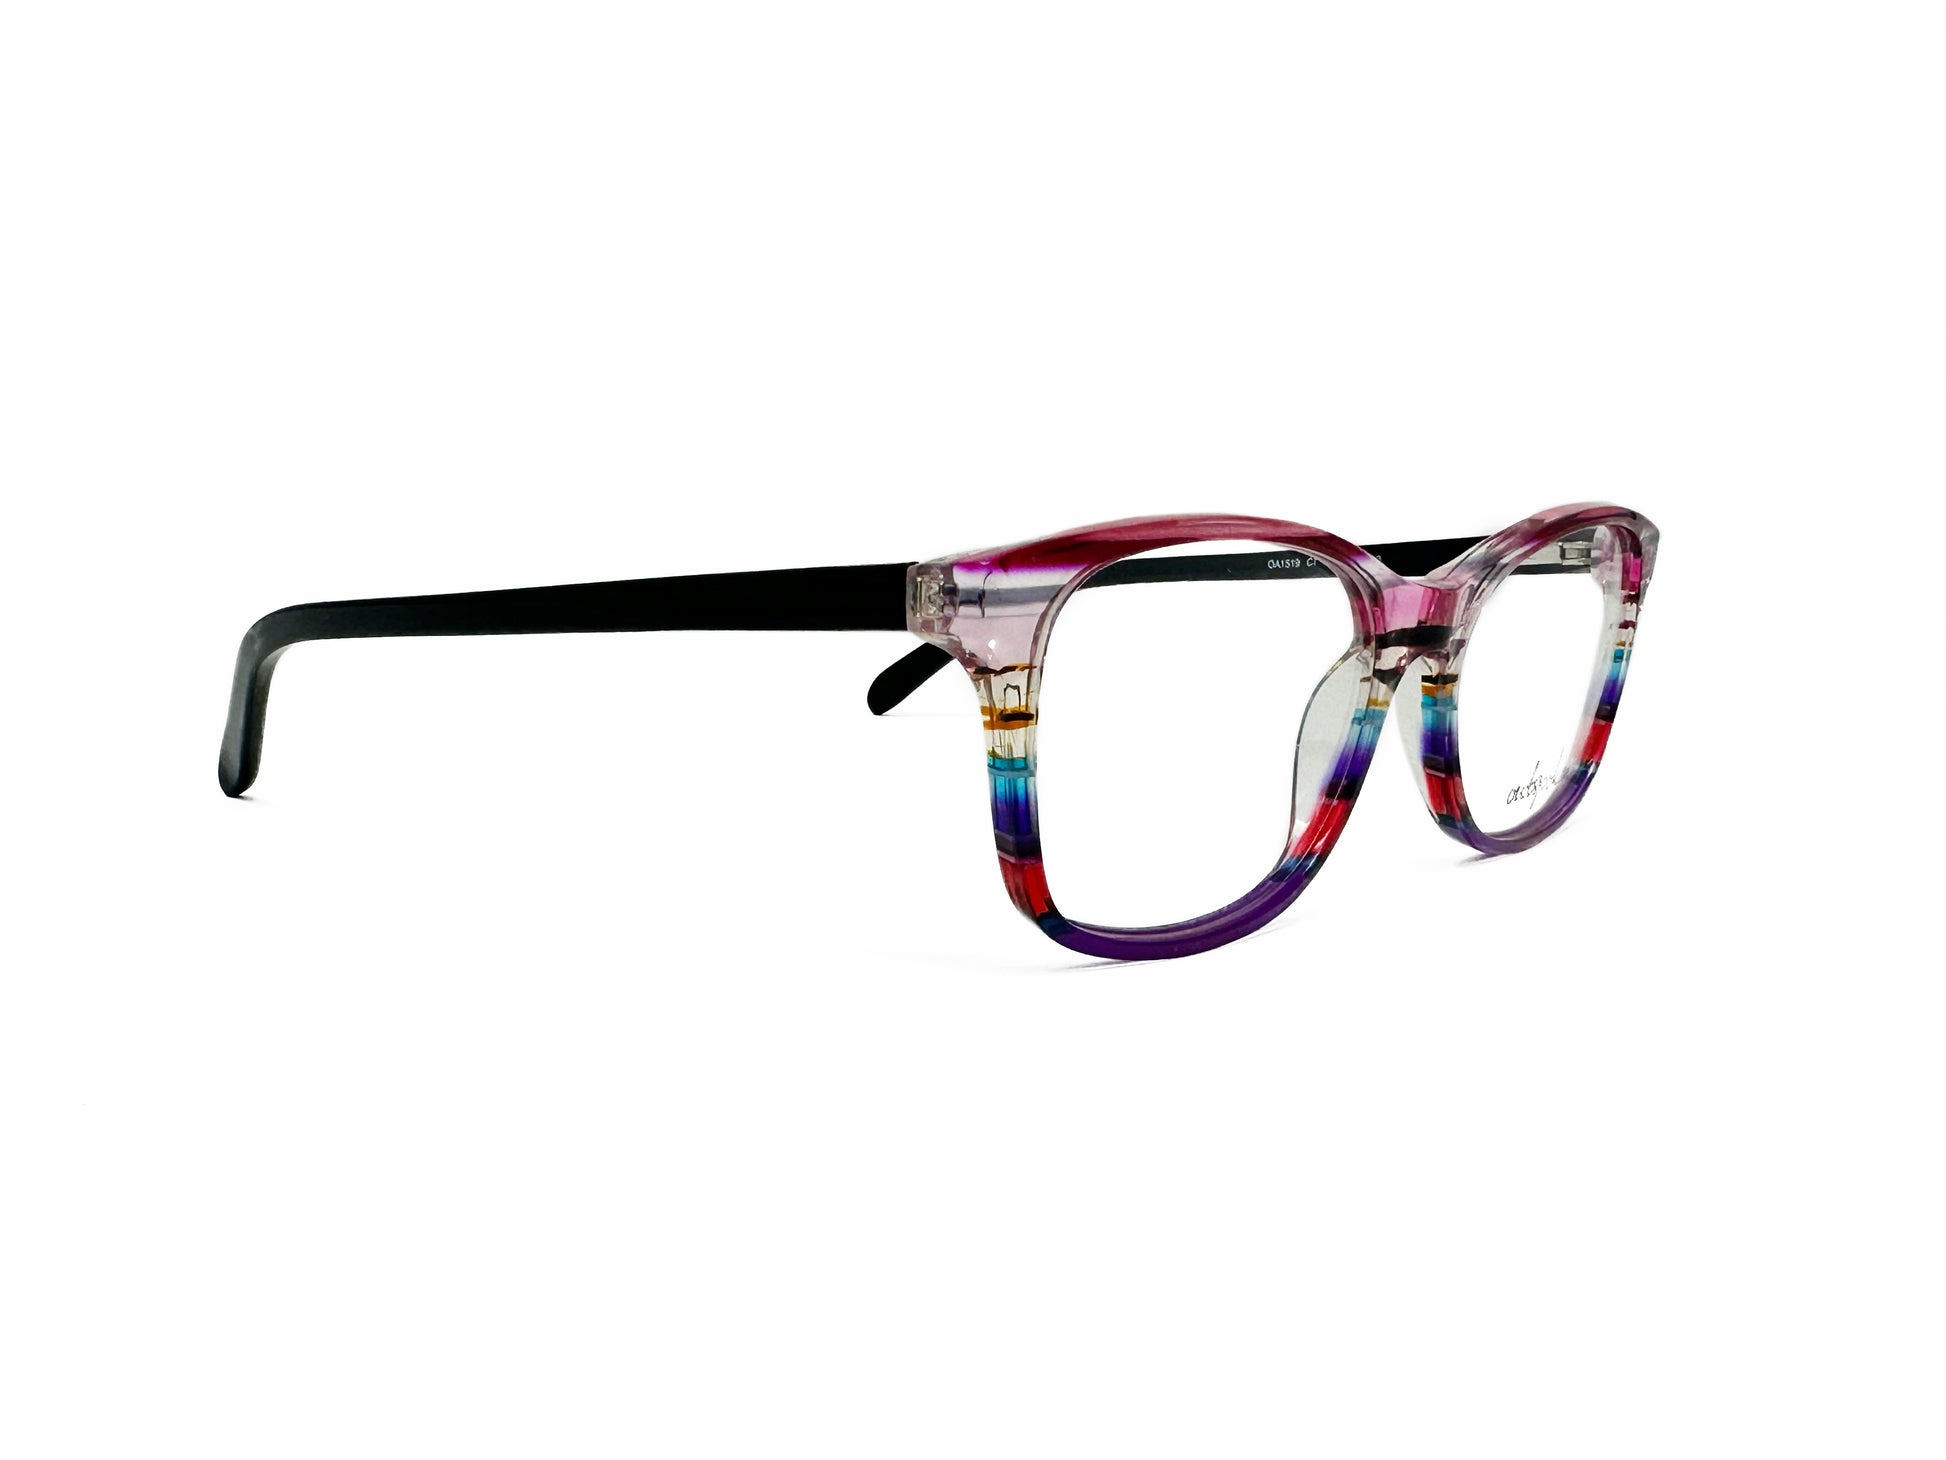 Outspoken rectangular acetate optical frame. Model: OA1519. Color: C7 - Pink, purple, blue, yellow, and transparent stripes. Side view